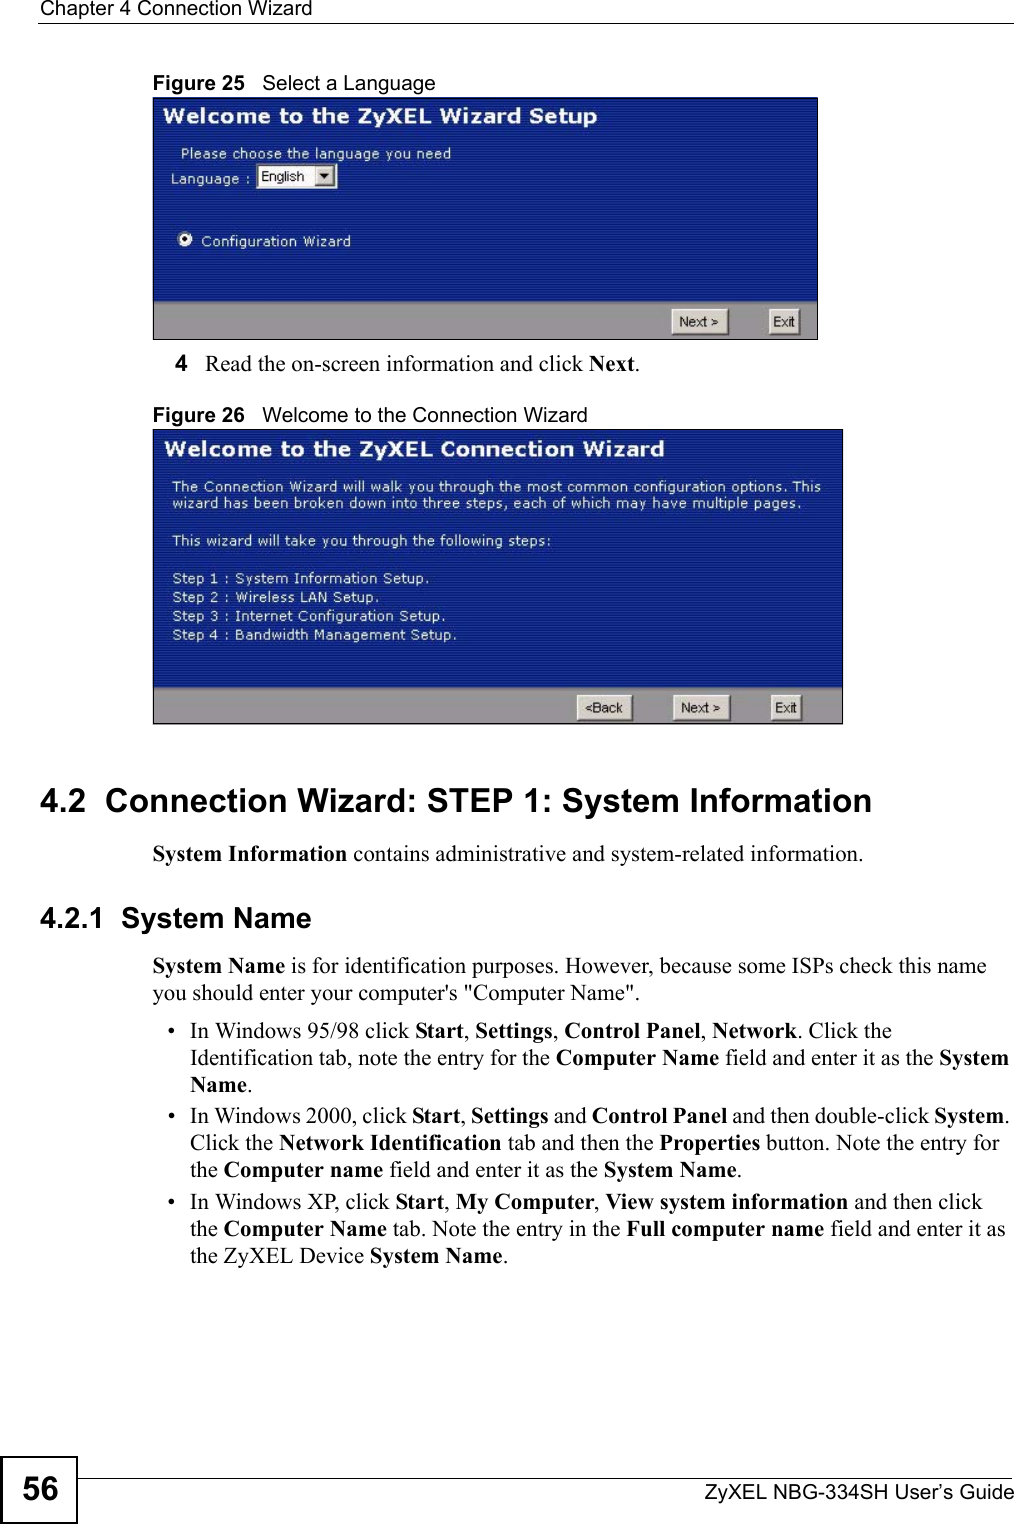 Chapter 4 Connection WizardZyXEL NBG-334SH User’s Guide56Figure 25   Select a Language4Read the on-screen information and click Next.Figure 26   Welcome to the Connection Wizard4.2  Connection Wizard: STEP 1: System InformationSystem Information contains administrative and system-related information.4.2.1  System NameSystem Name is for identification purposes. However, because some ISPs check this name you should enter your computer&apos;s &quot;Computer Name&quot;. • In Windows 95/98 click Start, Settings, Control Panel, Network. Click the Identification tab, note the entry for the Computer Name field and enter it as the System Name.• In Windows 2000, click Start, Settings and Control Panel and then double-click System. Click the Network Identification tab and then the Properties button. Note the entry for the Computer name field and enter it as the System Name.• In Windows XP, click Start, My Computer, View system information and then click the Computer Name tab. Note the entry in the Full computer name field and enter it as the ZyXEL Device System Name.